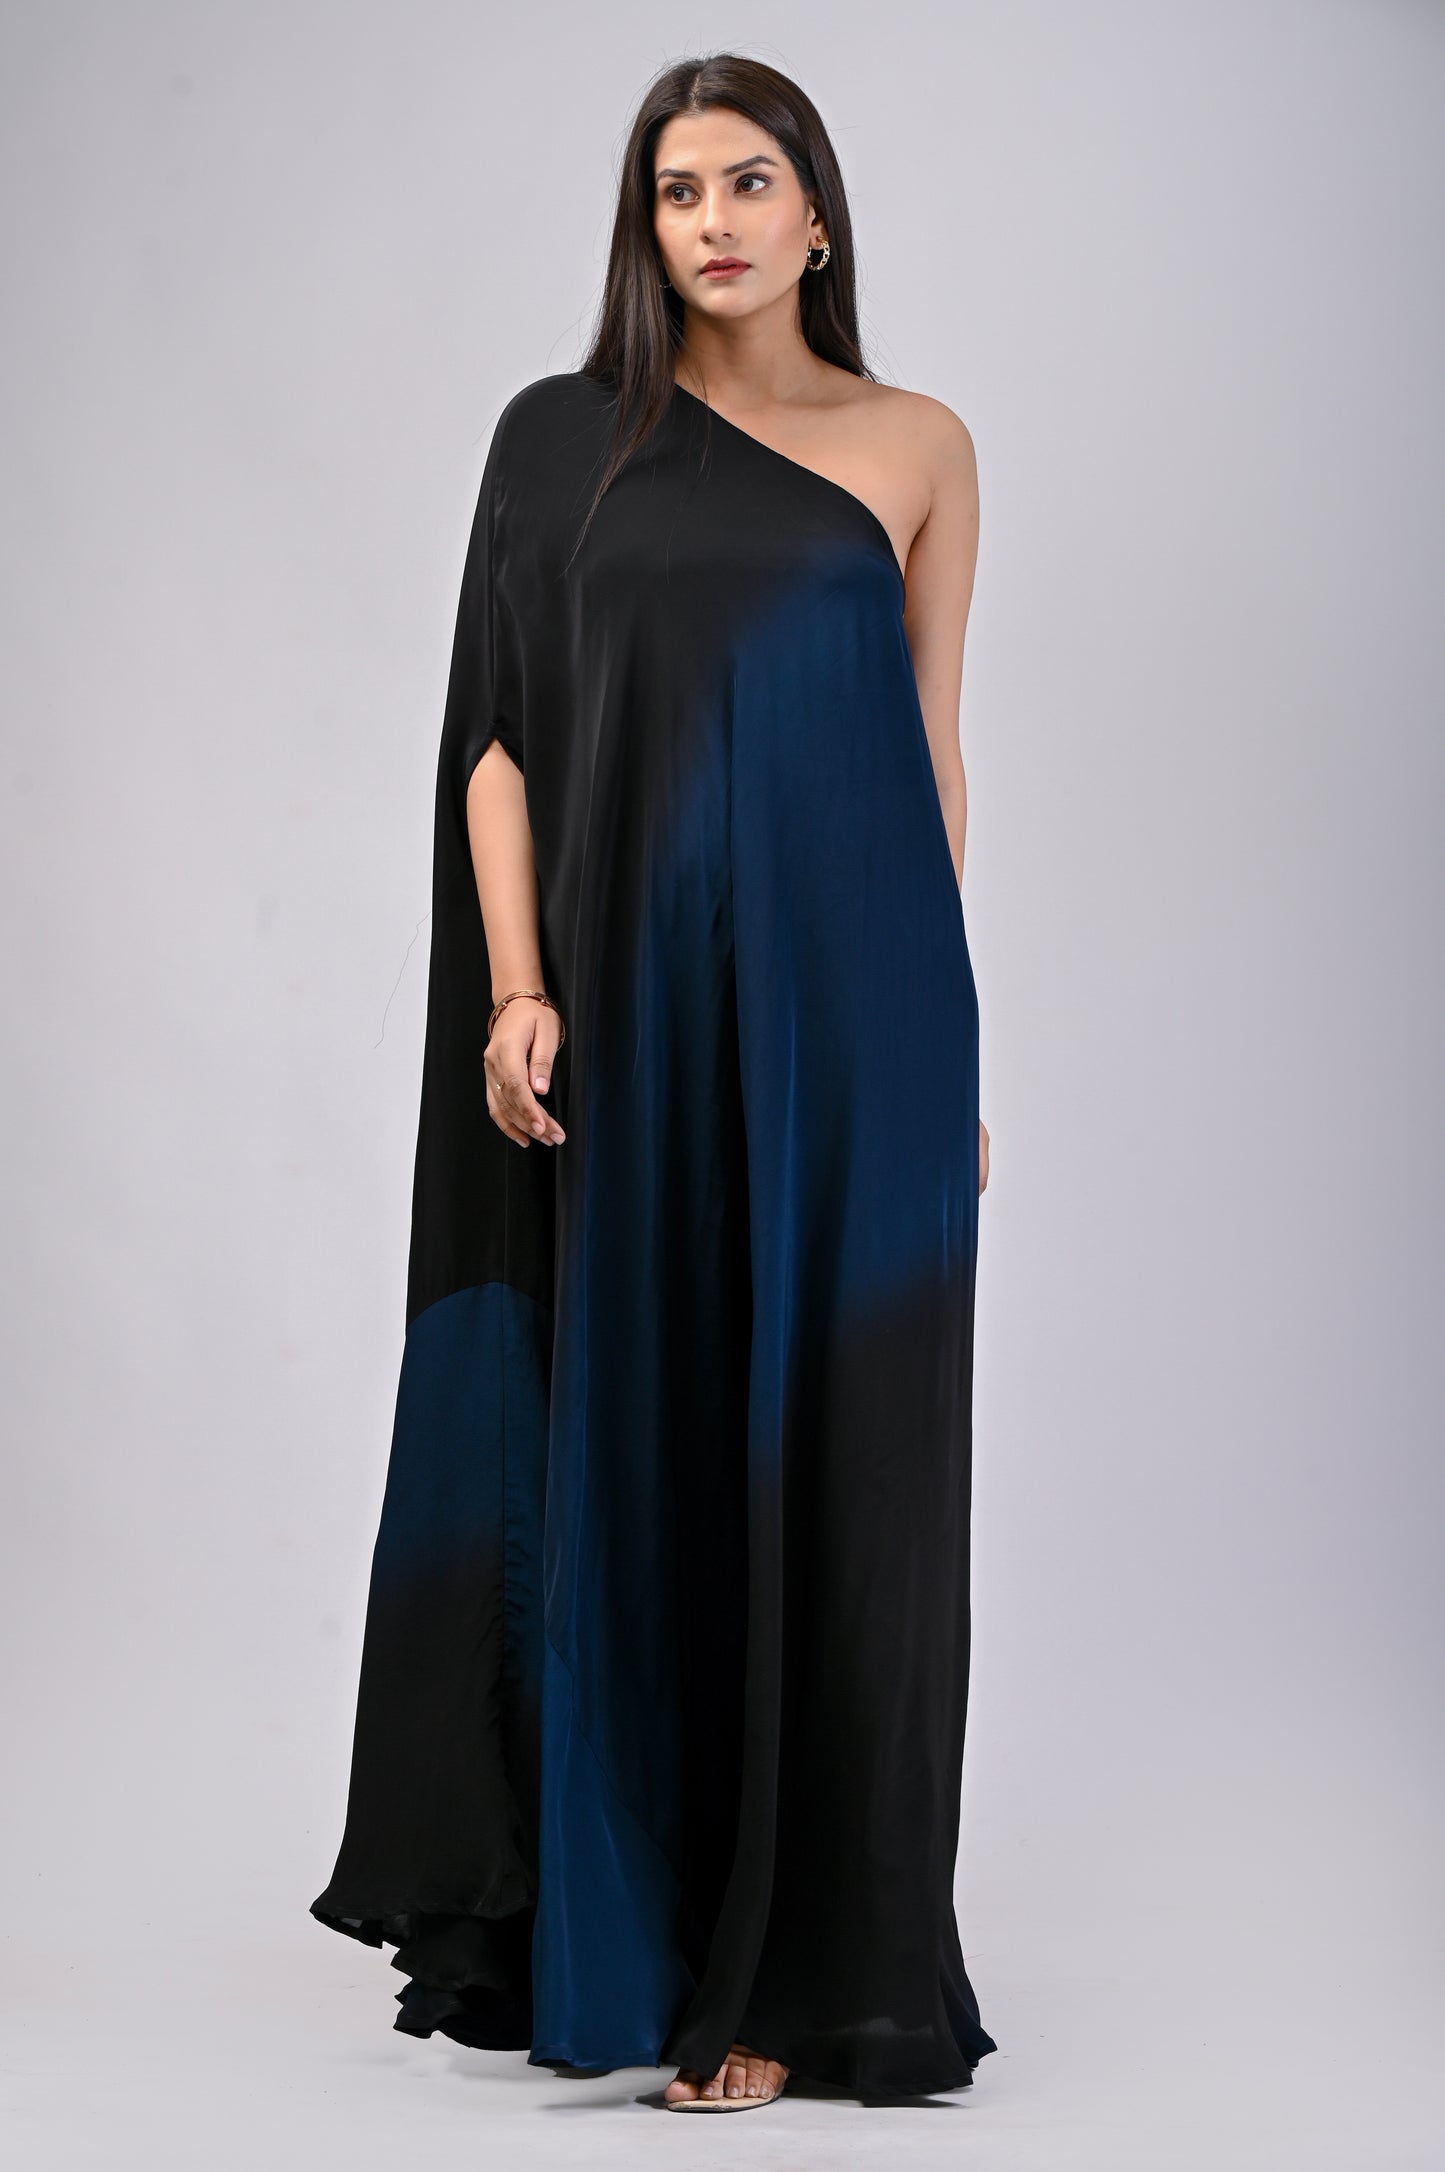 womens fashion, Blue gown, Midi Gowns, party wear gowns, cocktail dresses indian ethnic cocktail dresses cocktail dresses for women cocktail dress myntra cocktail dress meaning urbanic cocktail dress blue dress for ladies blue dress for girls blue dress party wear royal blue dress for ladies light blue dresswomen western gown party wear western gown party wear for wedding western gown party wear for ladies western gown party wear western party wear indo western gown party wear